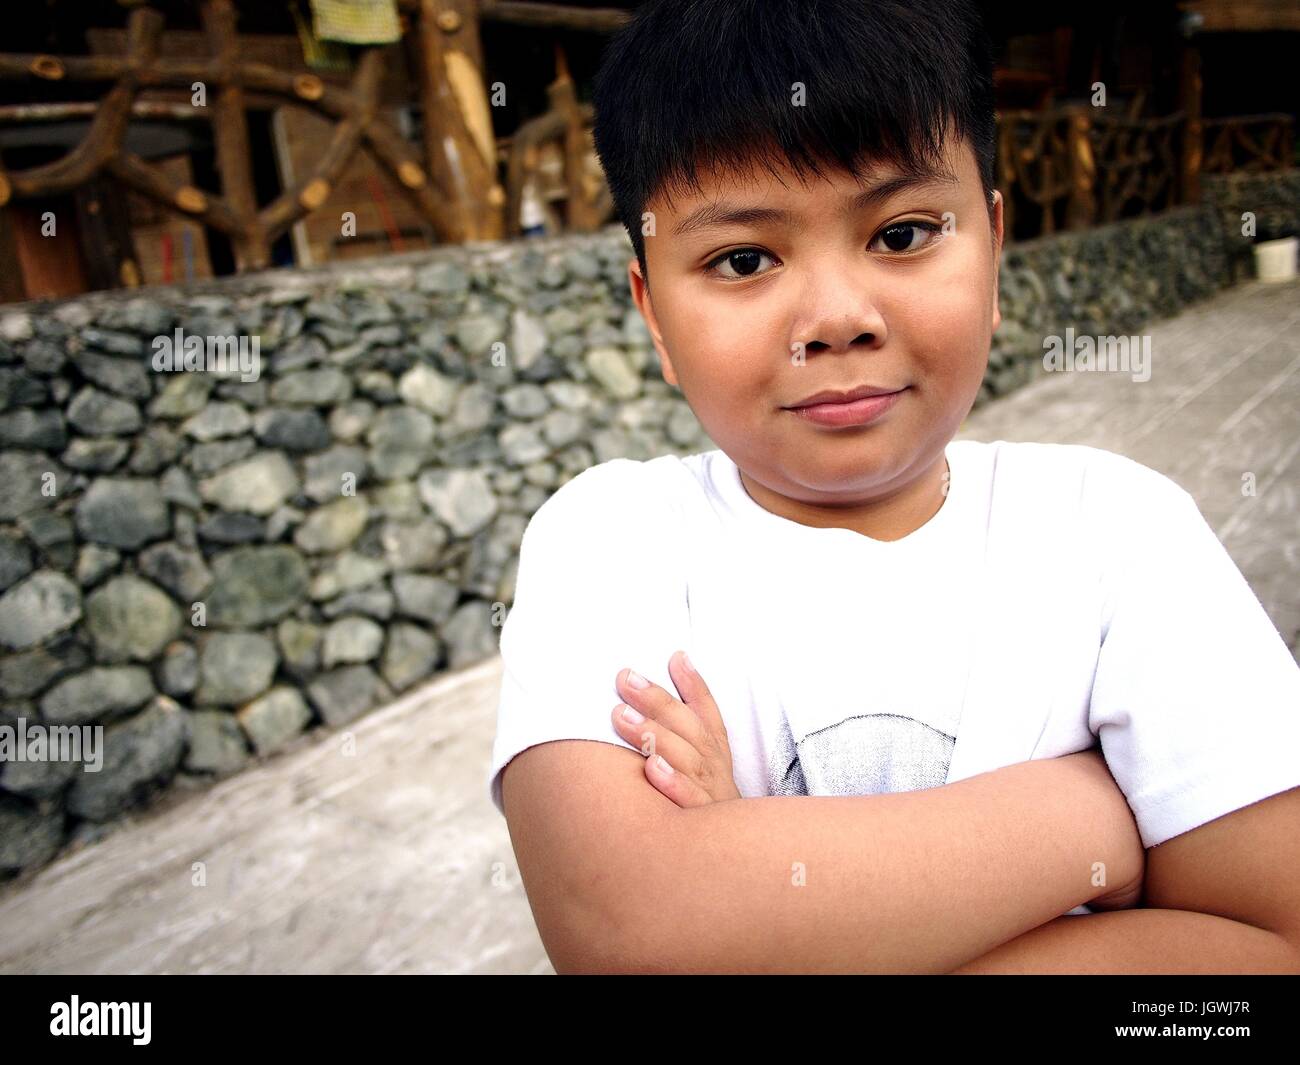 Portrait of a young asian boy Stock Photo